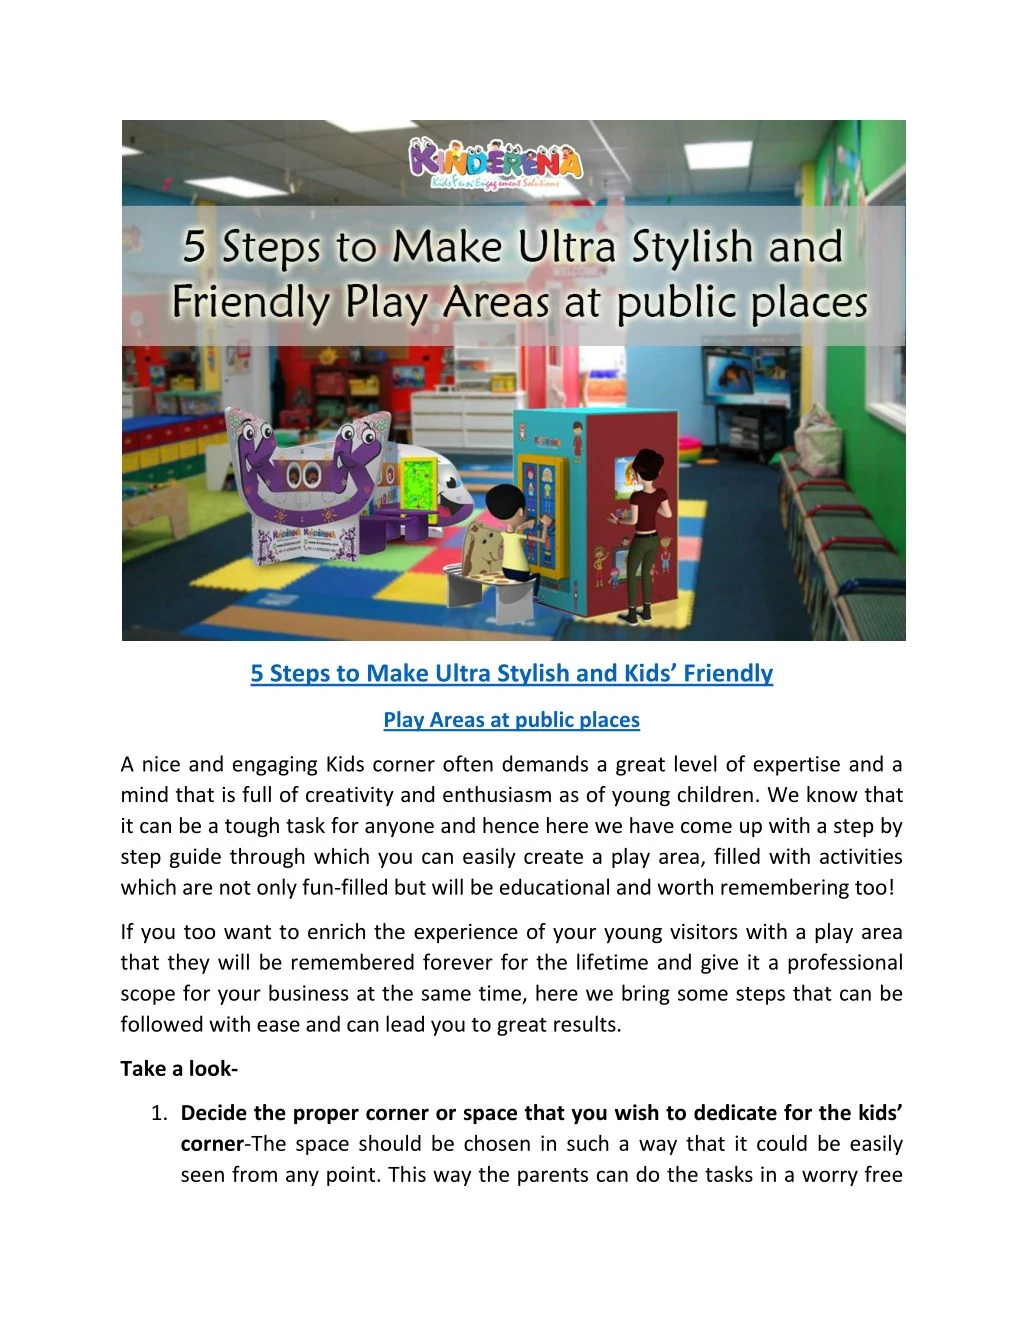 5 steps to make ultra stylish and kid s friendly